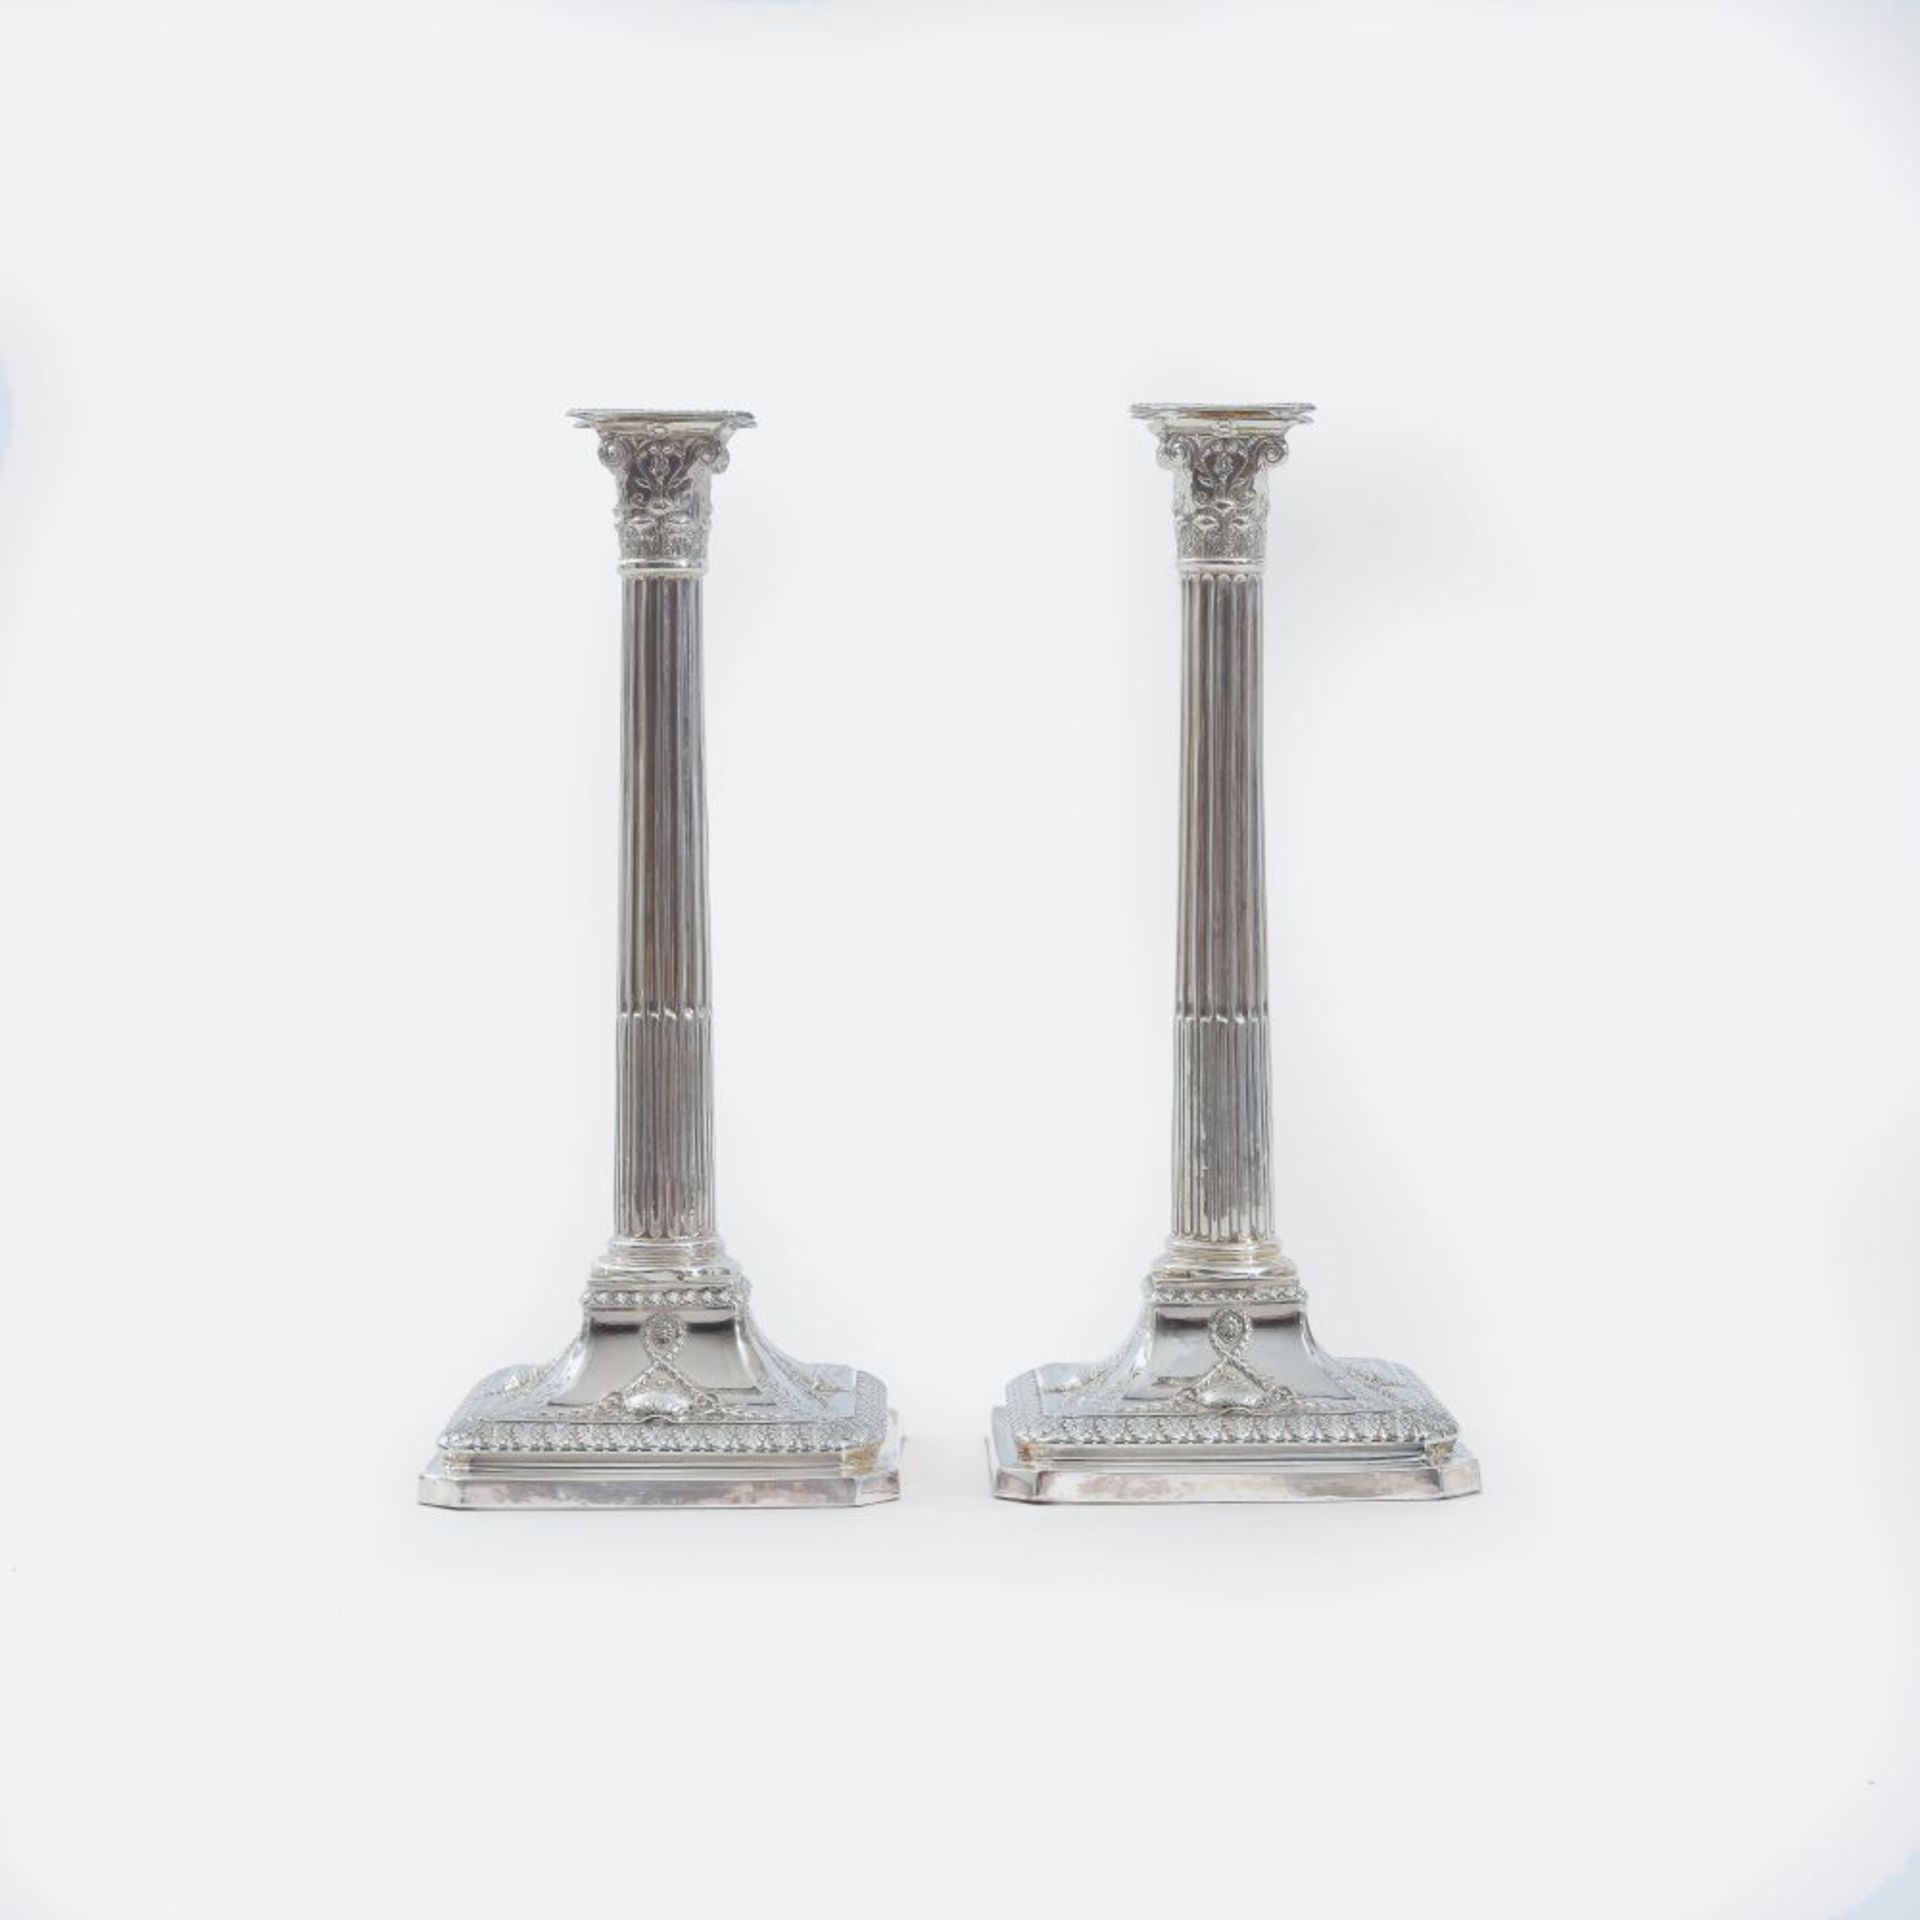 Winter, John Sheffield Master, active before 1773. A Pair of large George III Candleholders with Cor